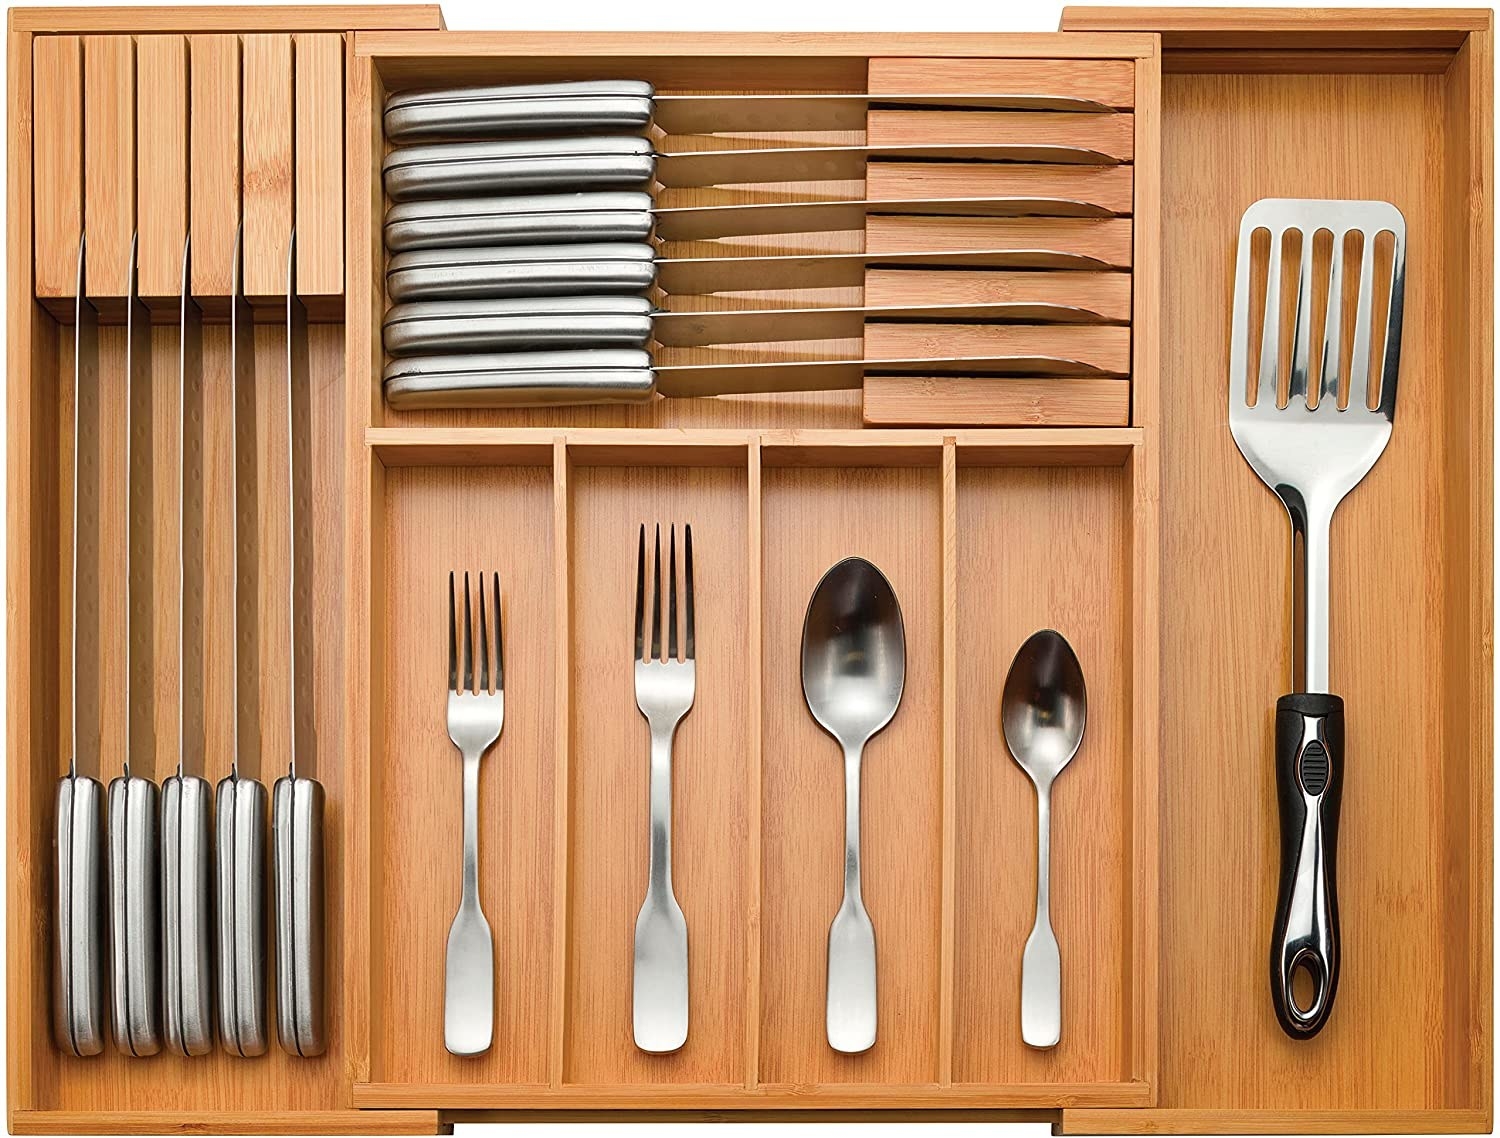 Several pieces of cutlery inside the bamboo organizer